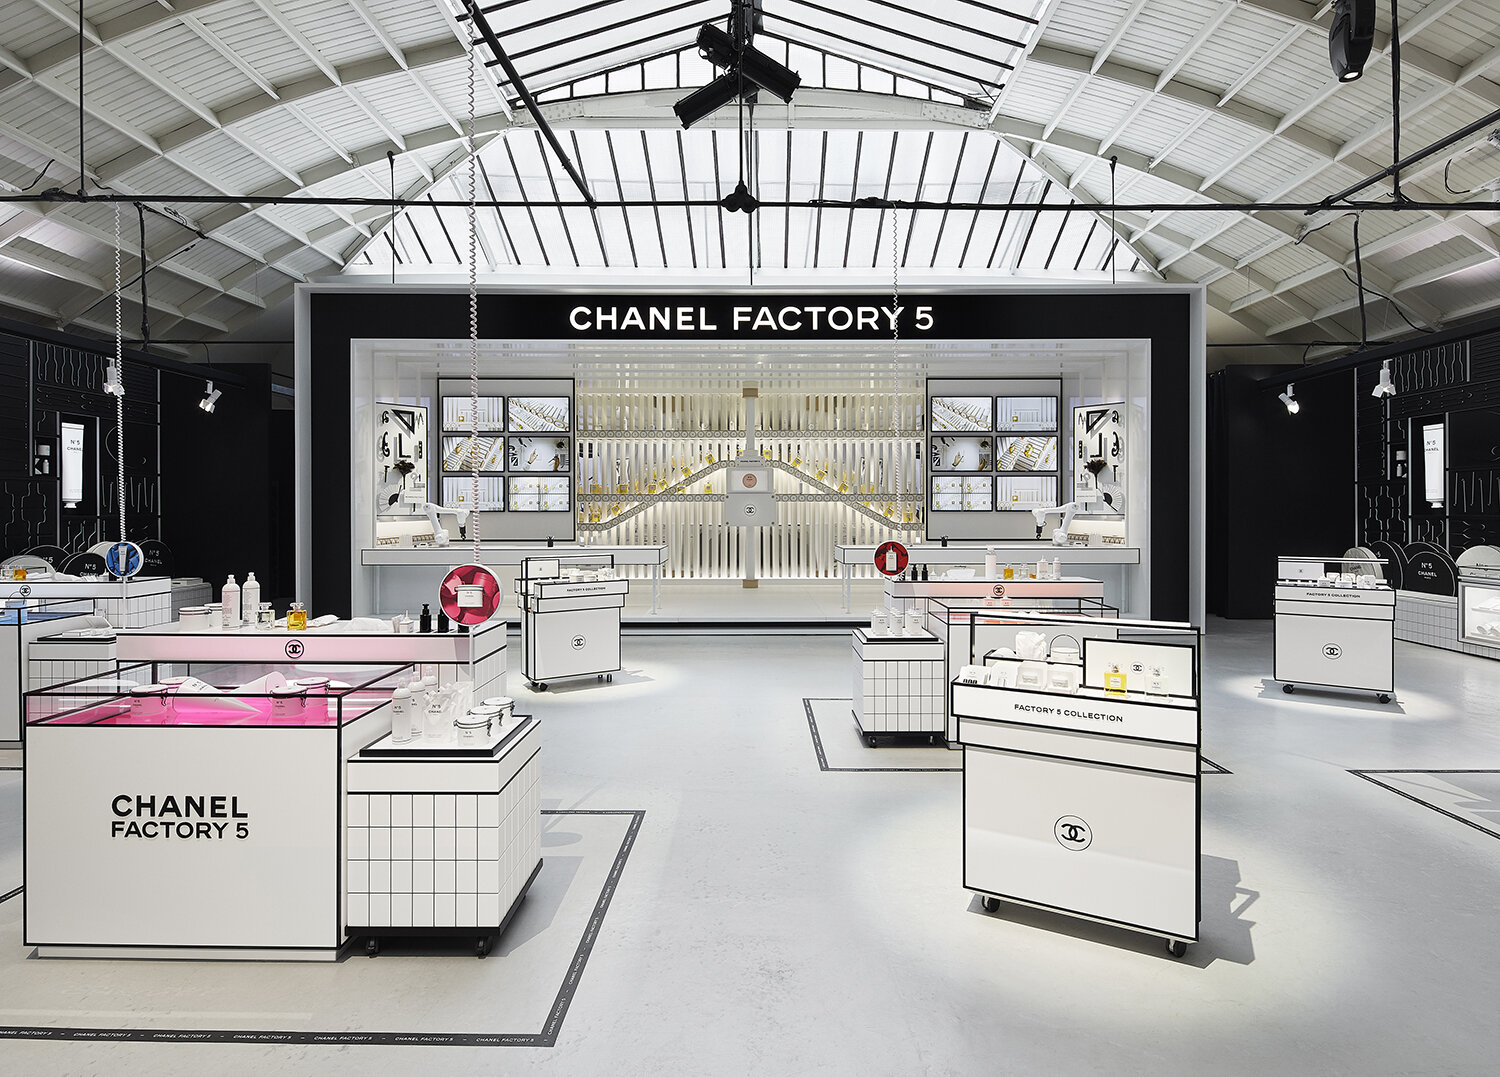 CHANEL FACTORY 5 — The Bold Concept